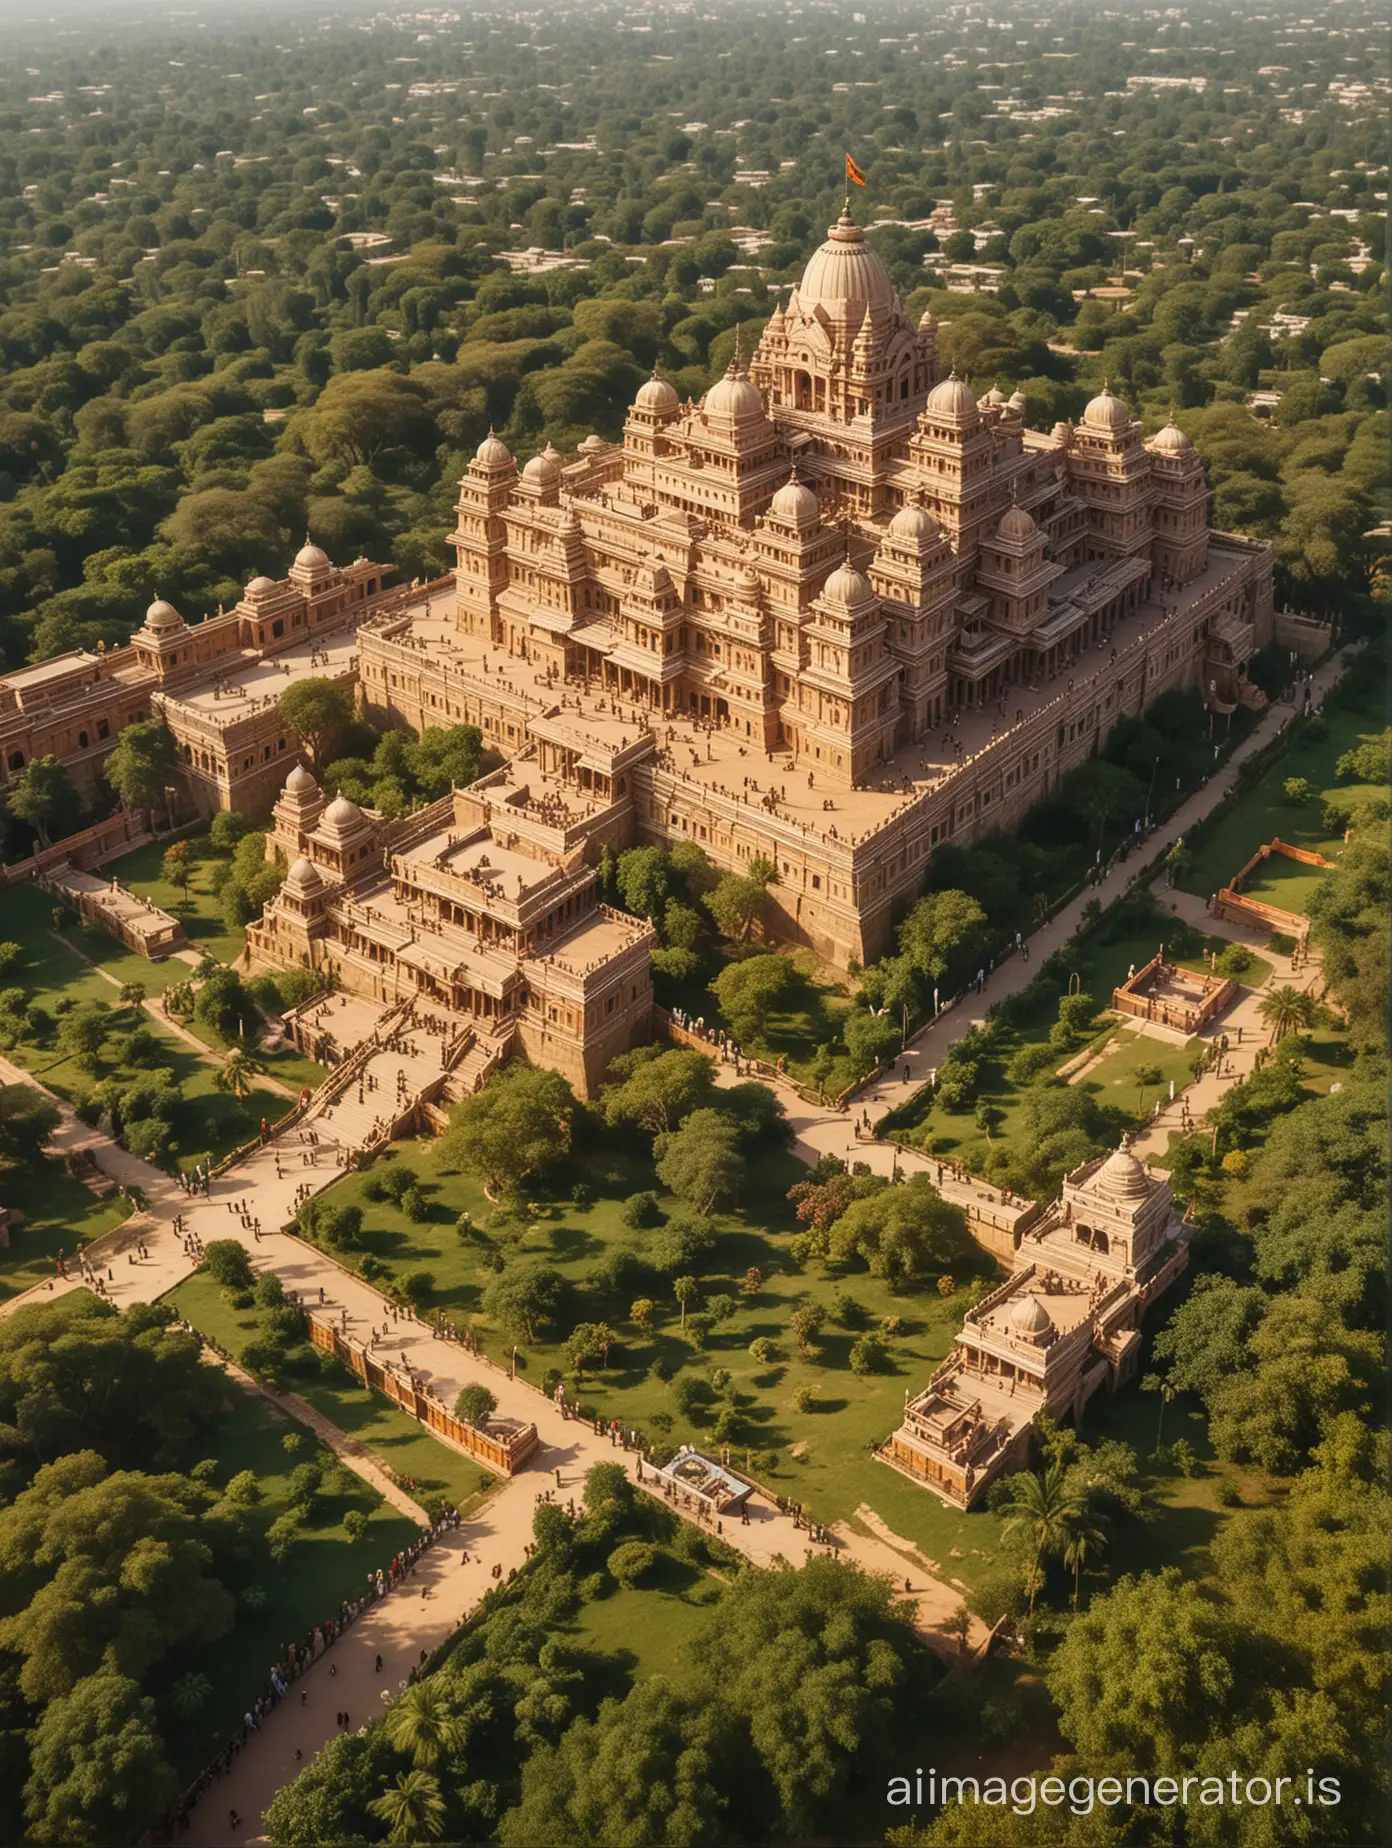 A grand aerial view of the kingdom in ancient India , showcasing its opulence and splendor, with the palace standing tall amidst lush gardens, colorful banners fluttering in the breeze, and bustling activity as servants scurry about attending to their task